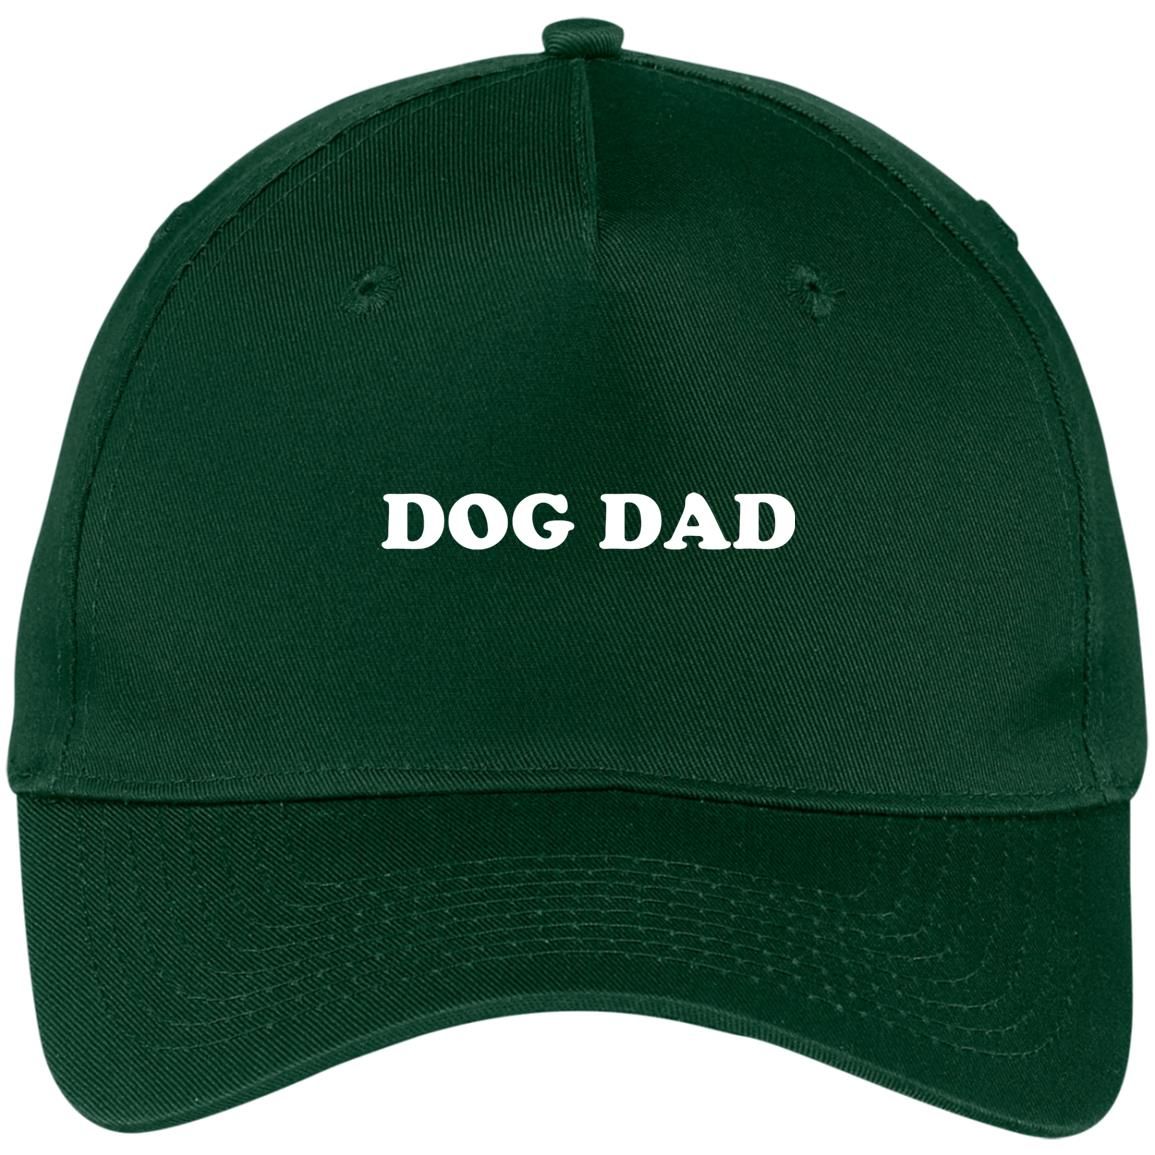 Dog Dat Embroidered Hat Style: CP86 Five Panel Twill Cap, Color: Hunter